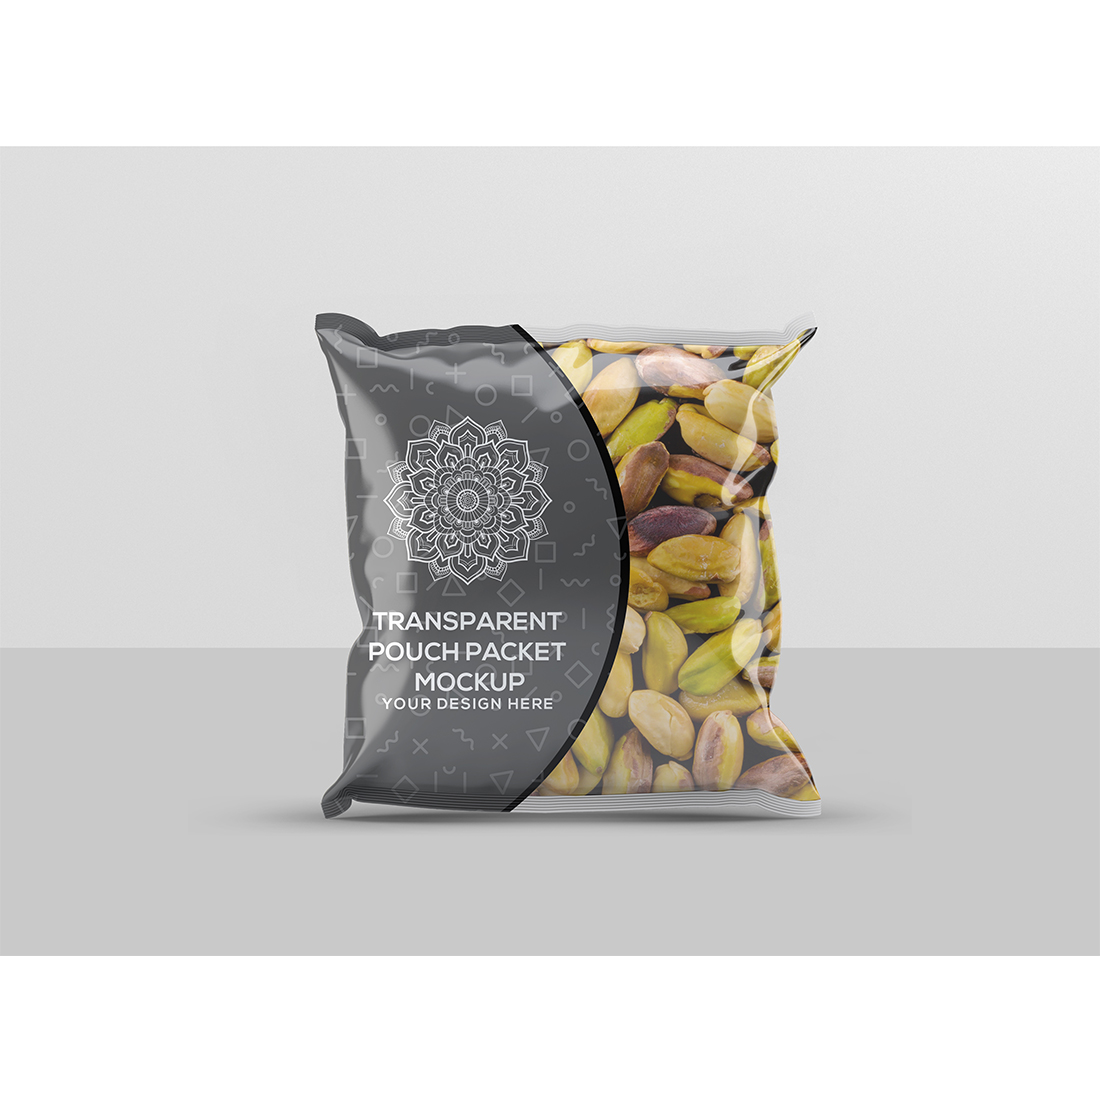 Transparent Pouch Packet Mockup cover image.